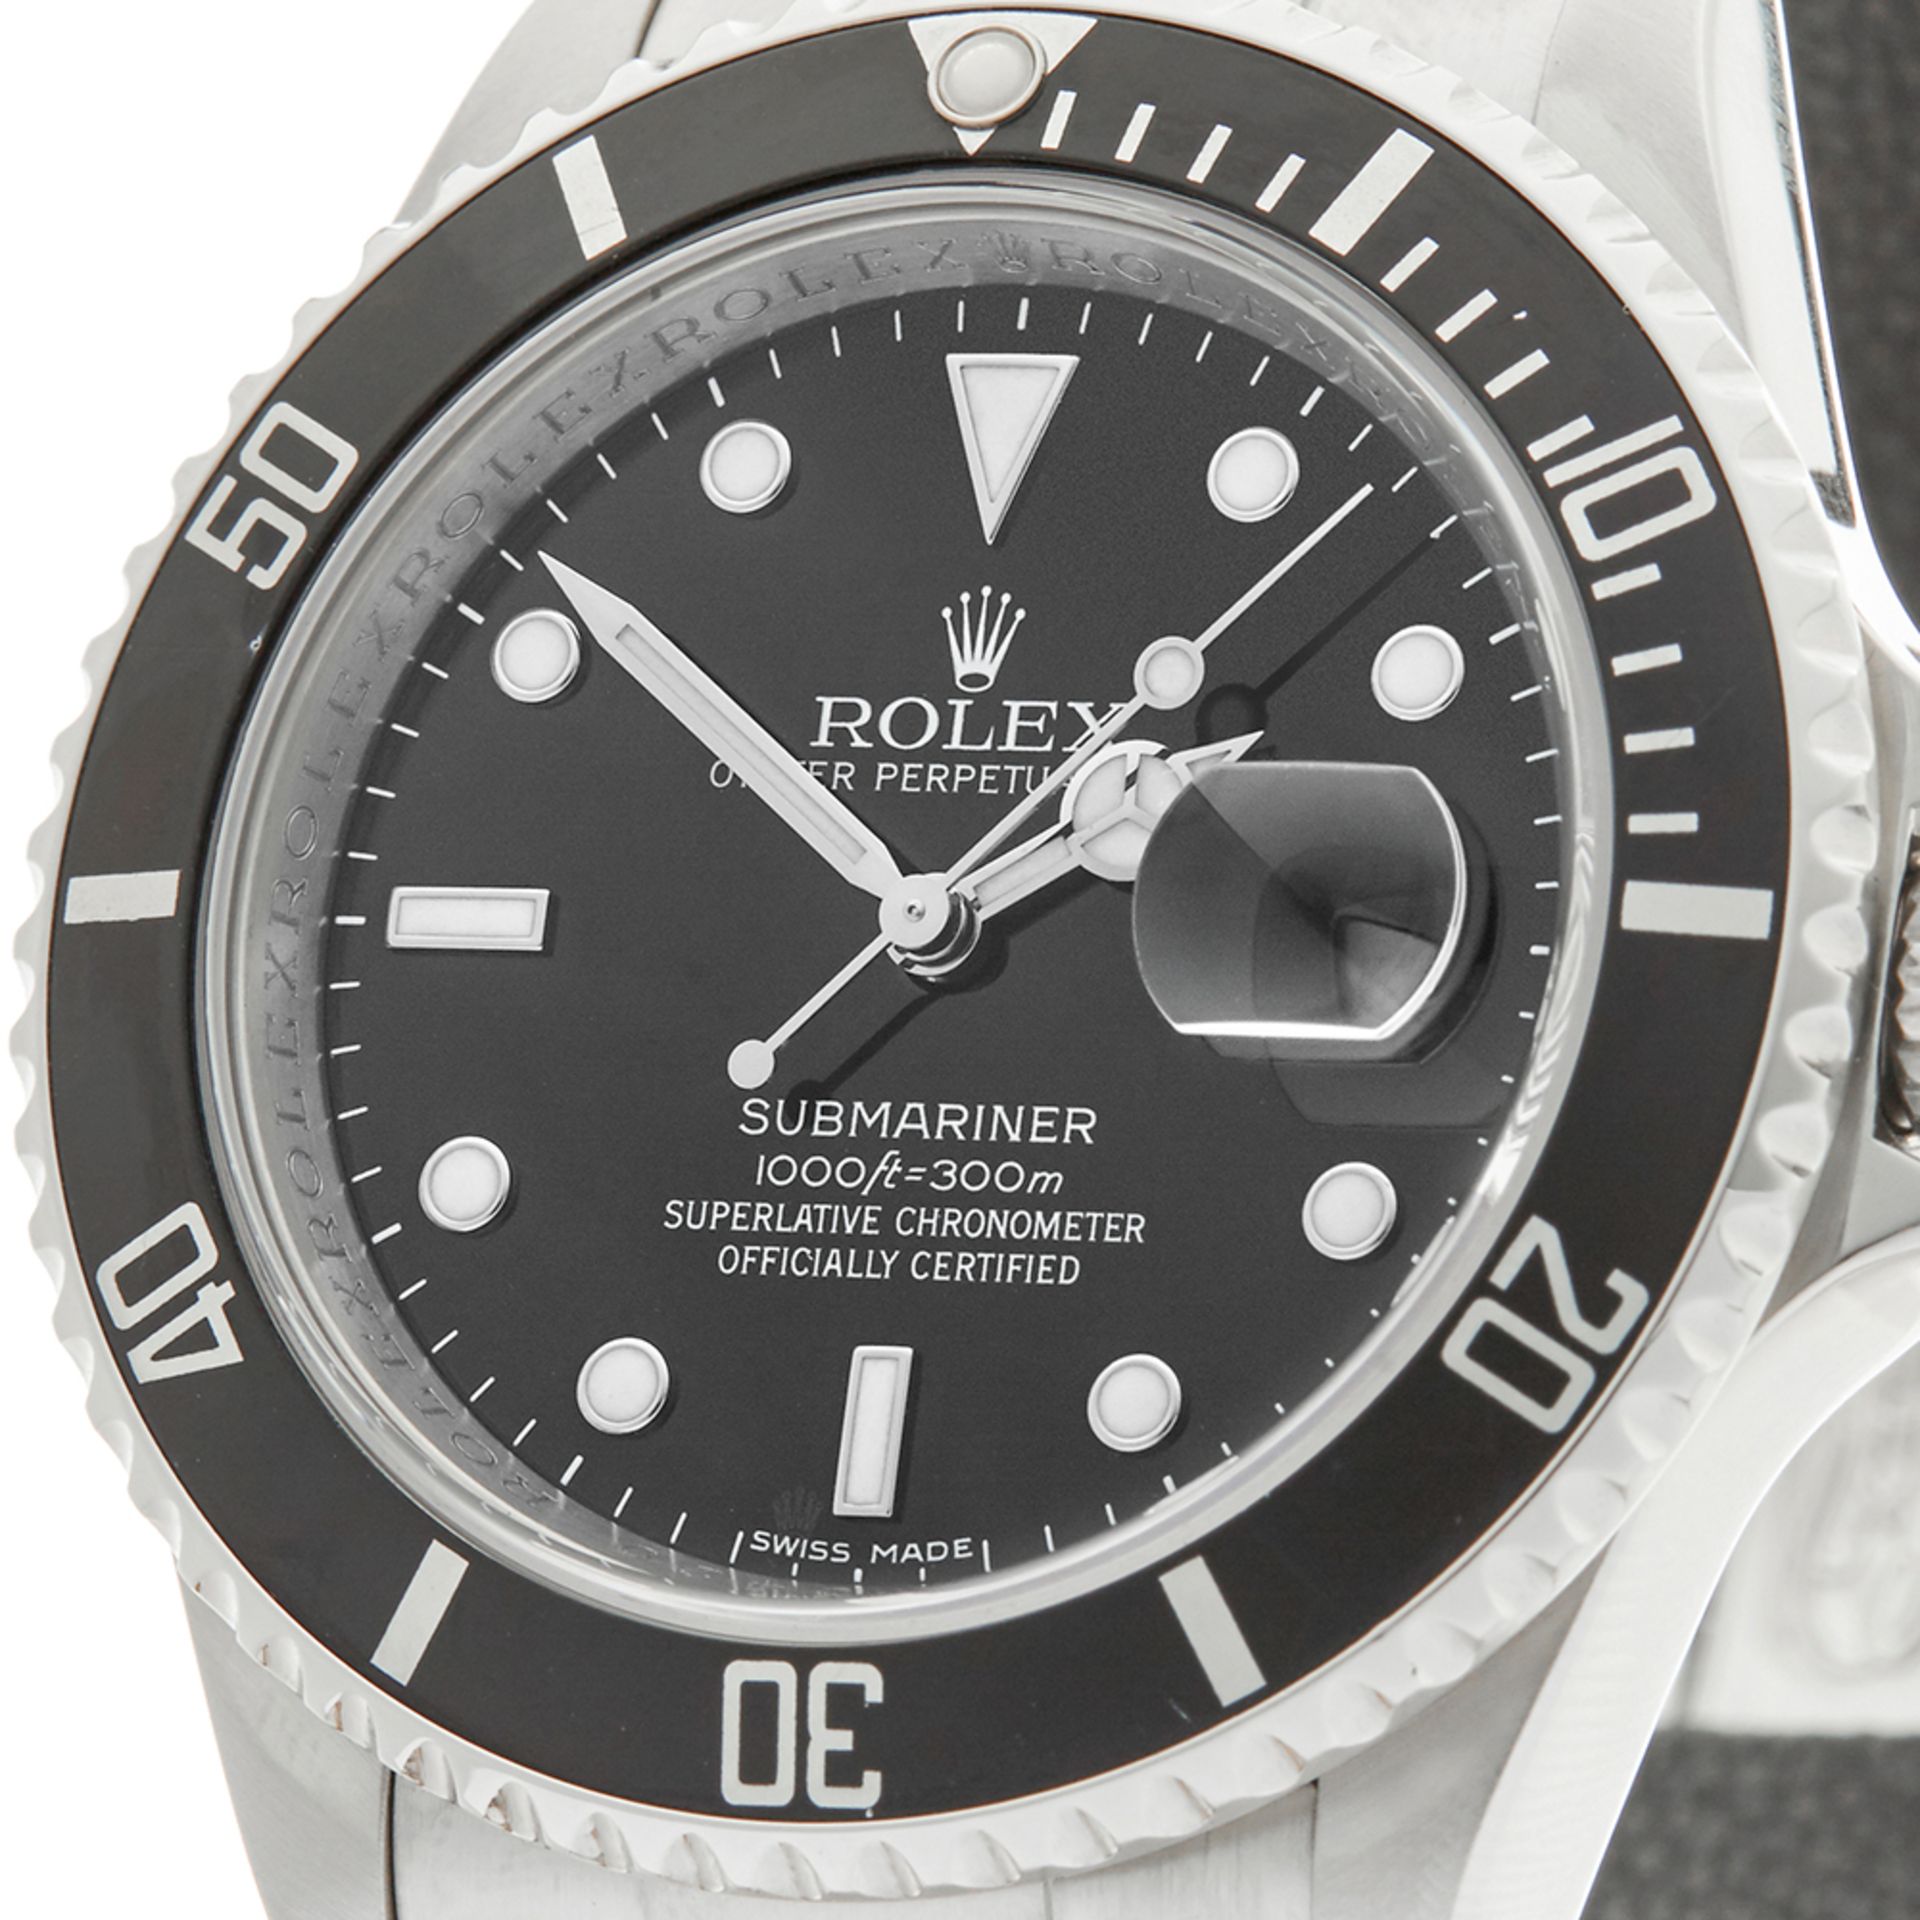 W3946 Submariner 40mm Stainless Steel - 16610 - Image 3 of 9